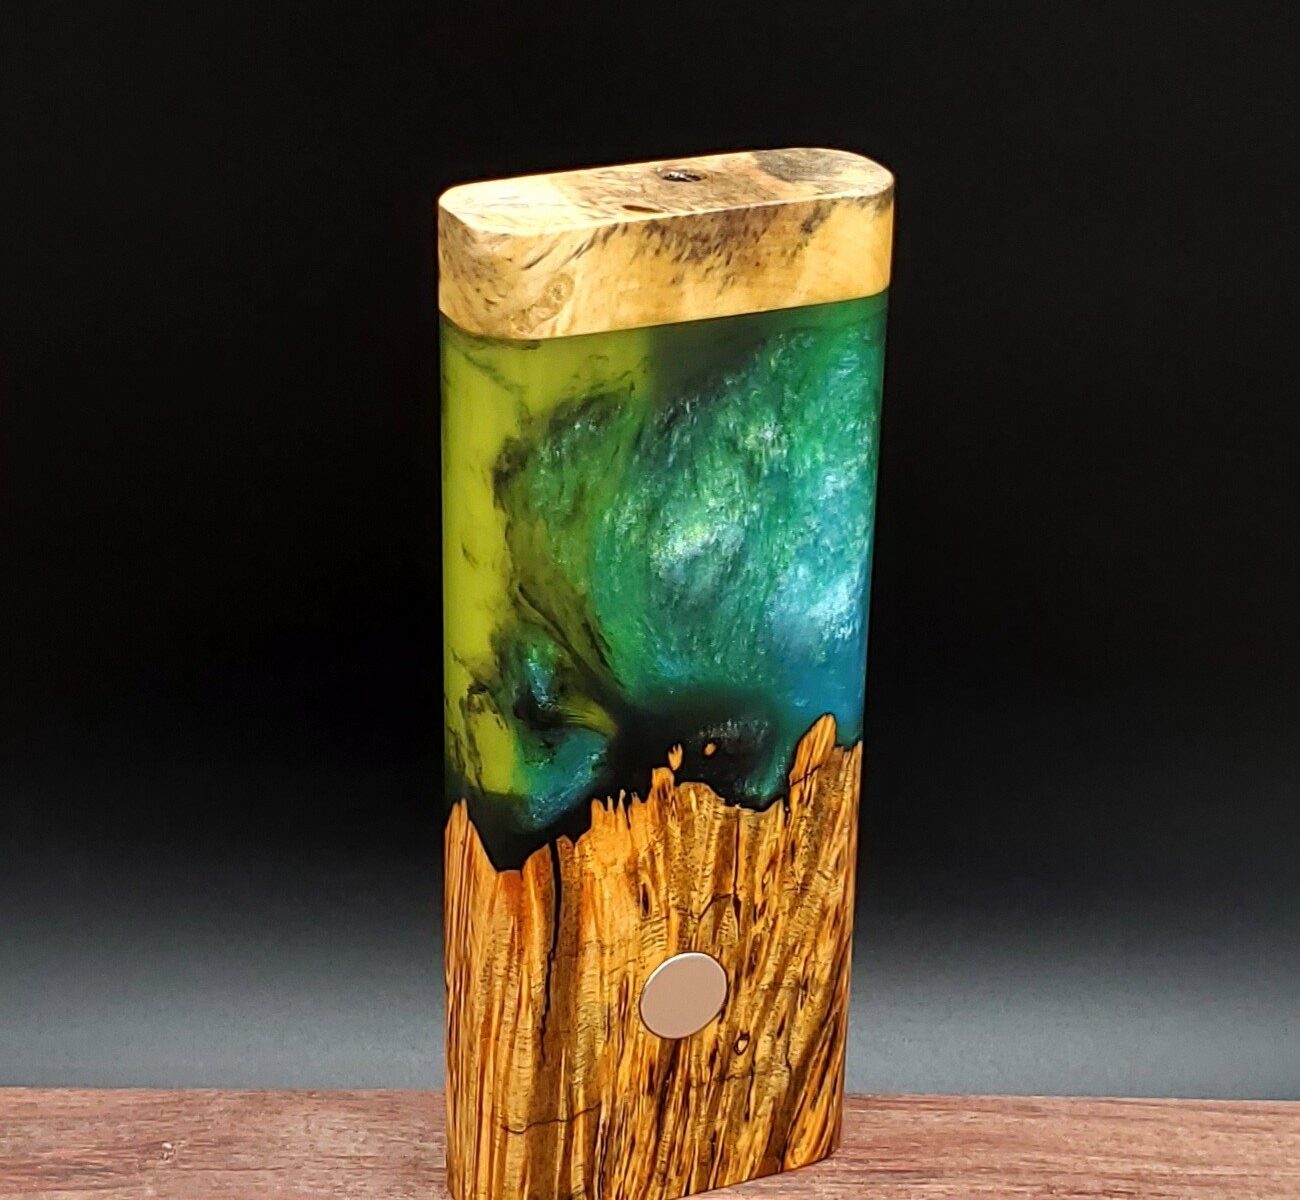 This image portrays Luminescent Cosmic Burl Dynavap Stash Case by Dovetail Woodwork.